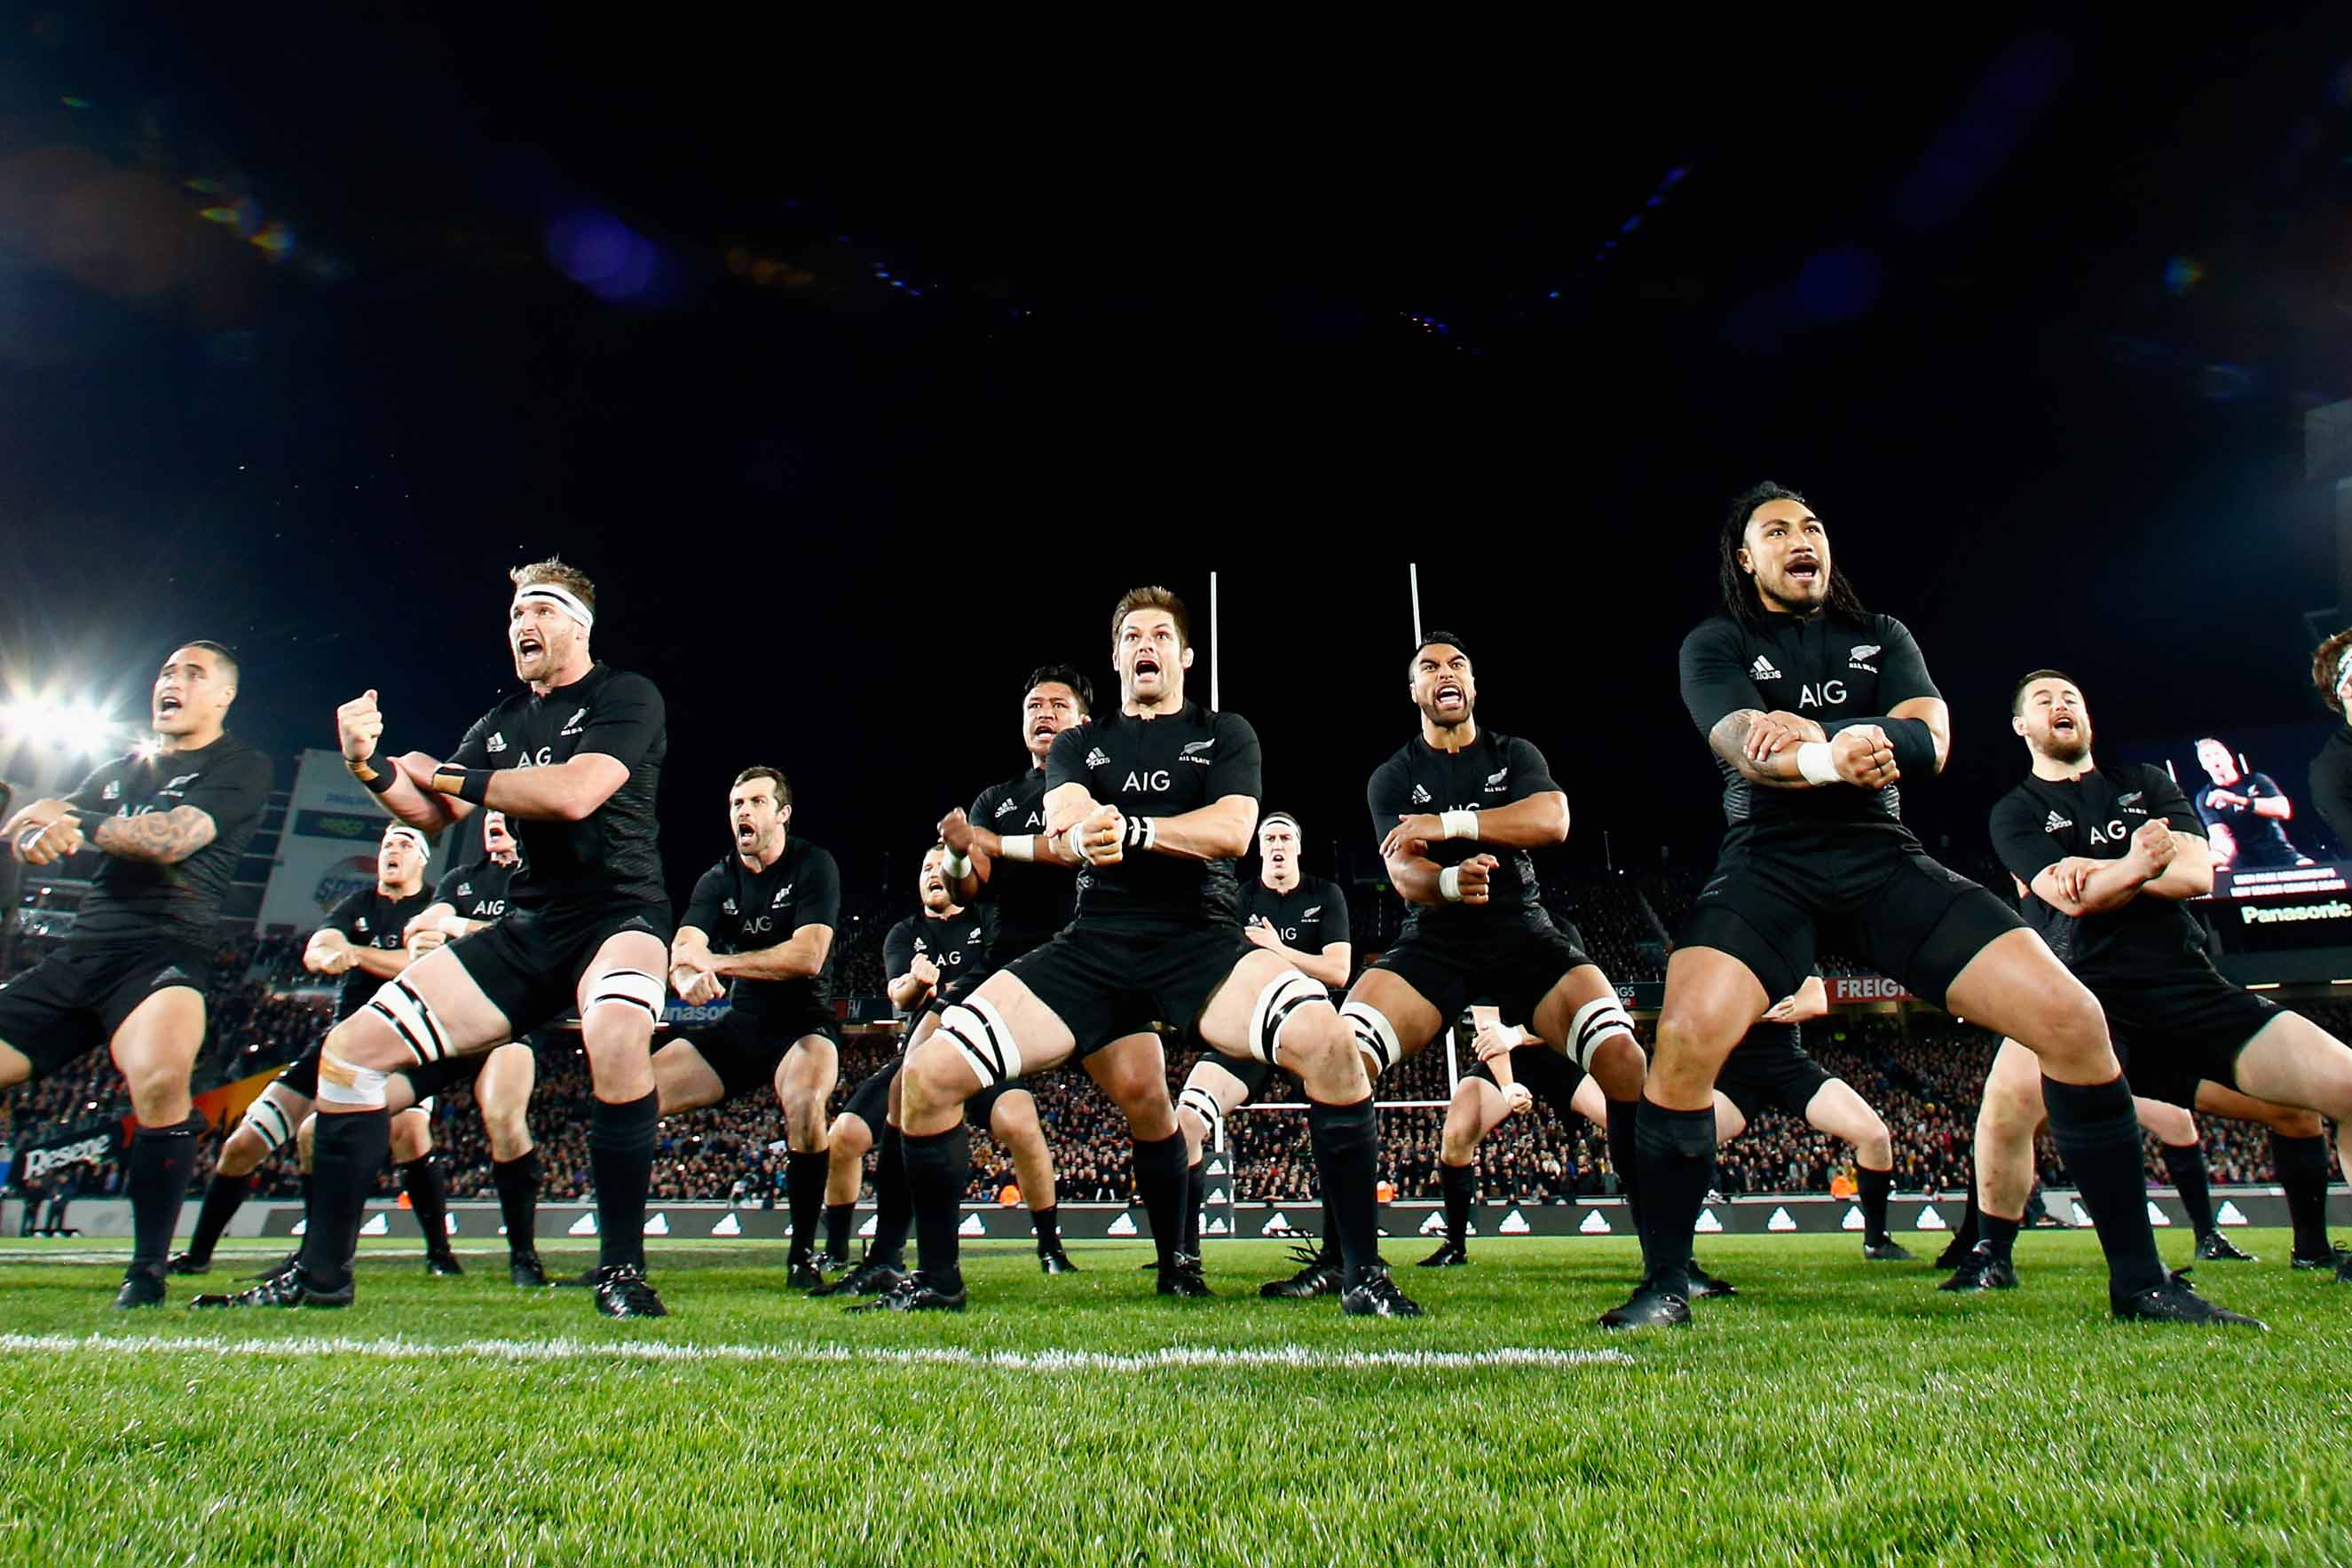 From left: Kieran Read, Richie McCaw and Ma'a Nonu of the All Blacks perform the haka during The Rugby Championship, Bledisloe Cup match between the New Zealand All Blacks and the Australian Wallabies at Eden Park on Aug. 15, 2015 in Auckland. (Phil Walter—Getty Images)